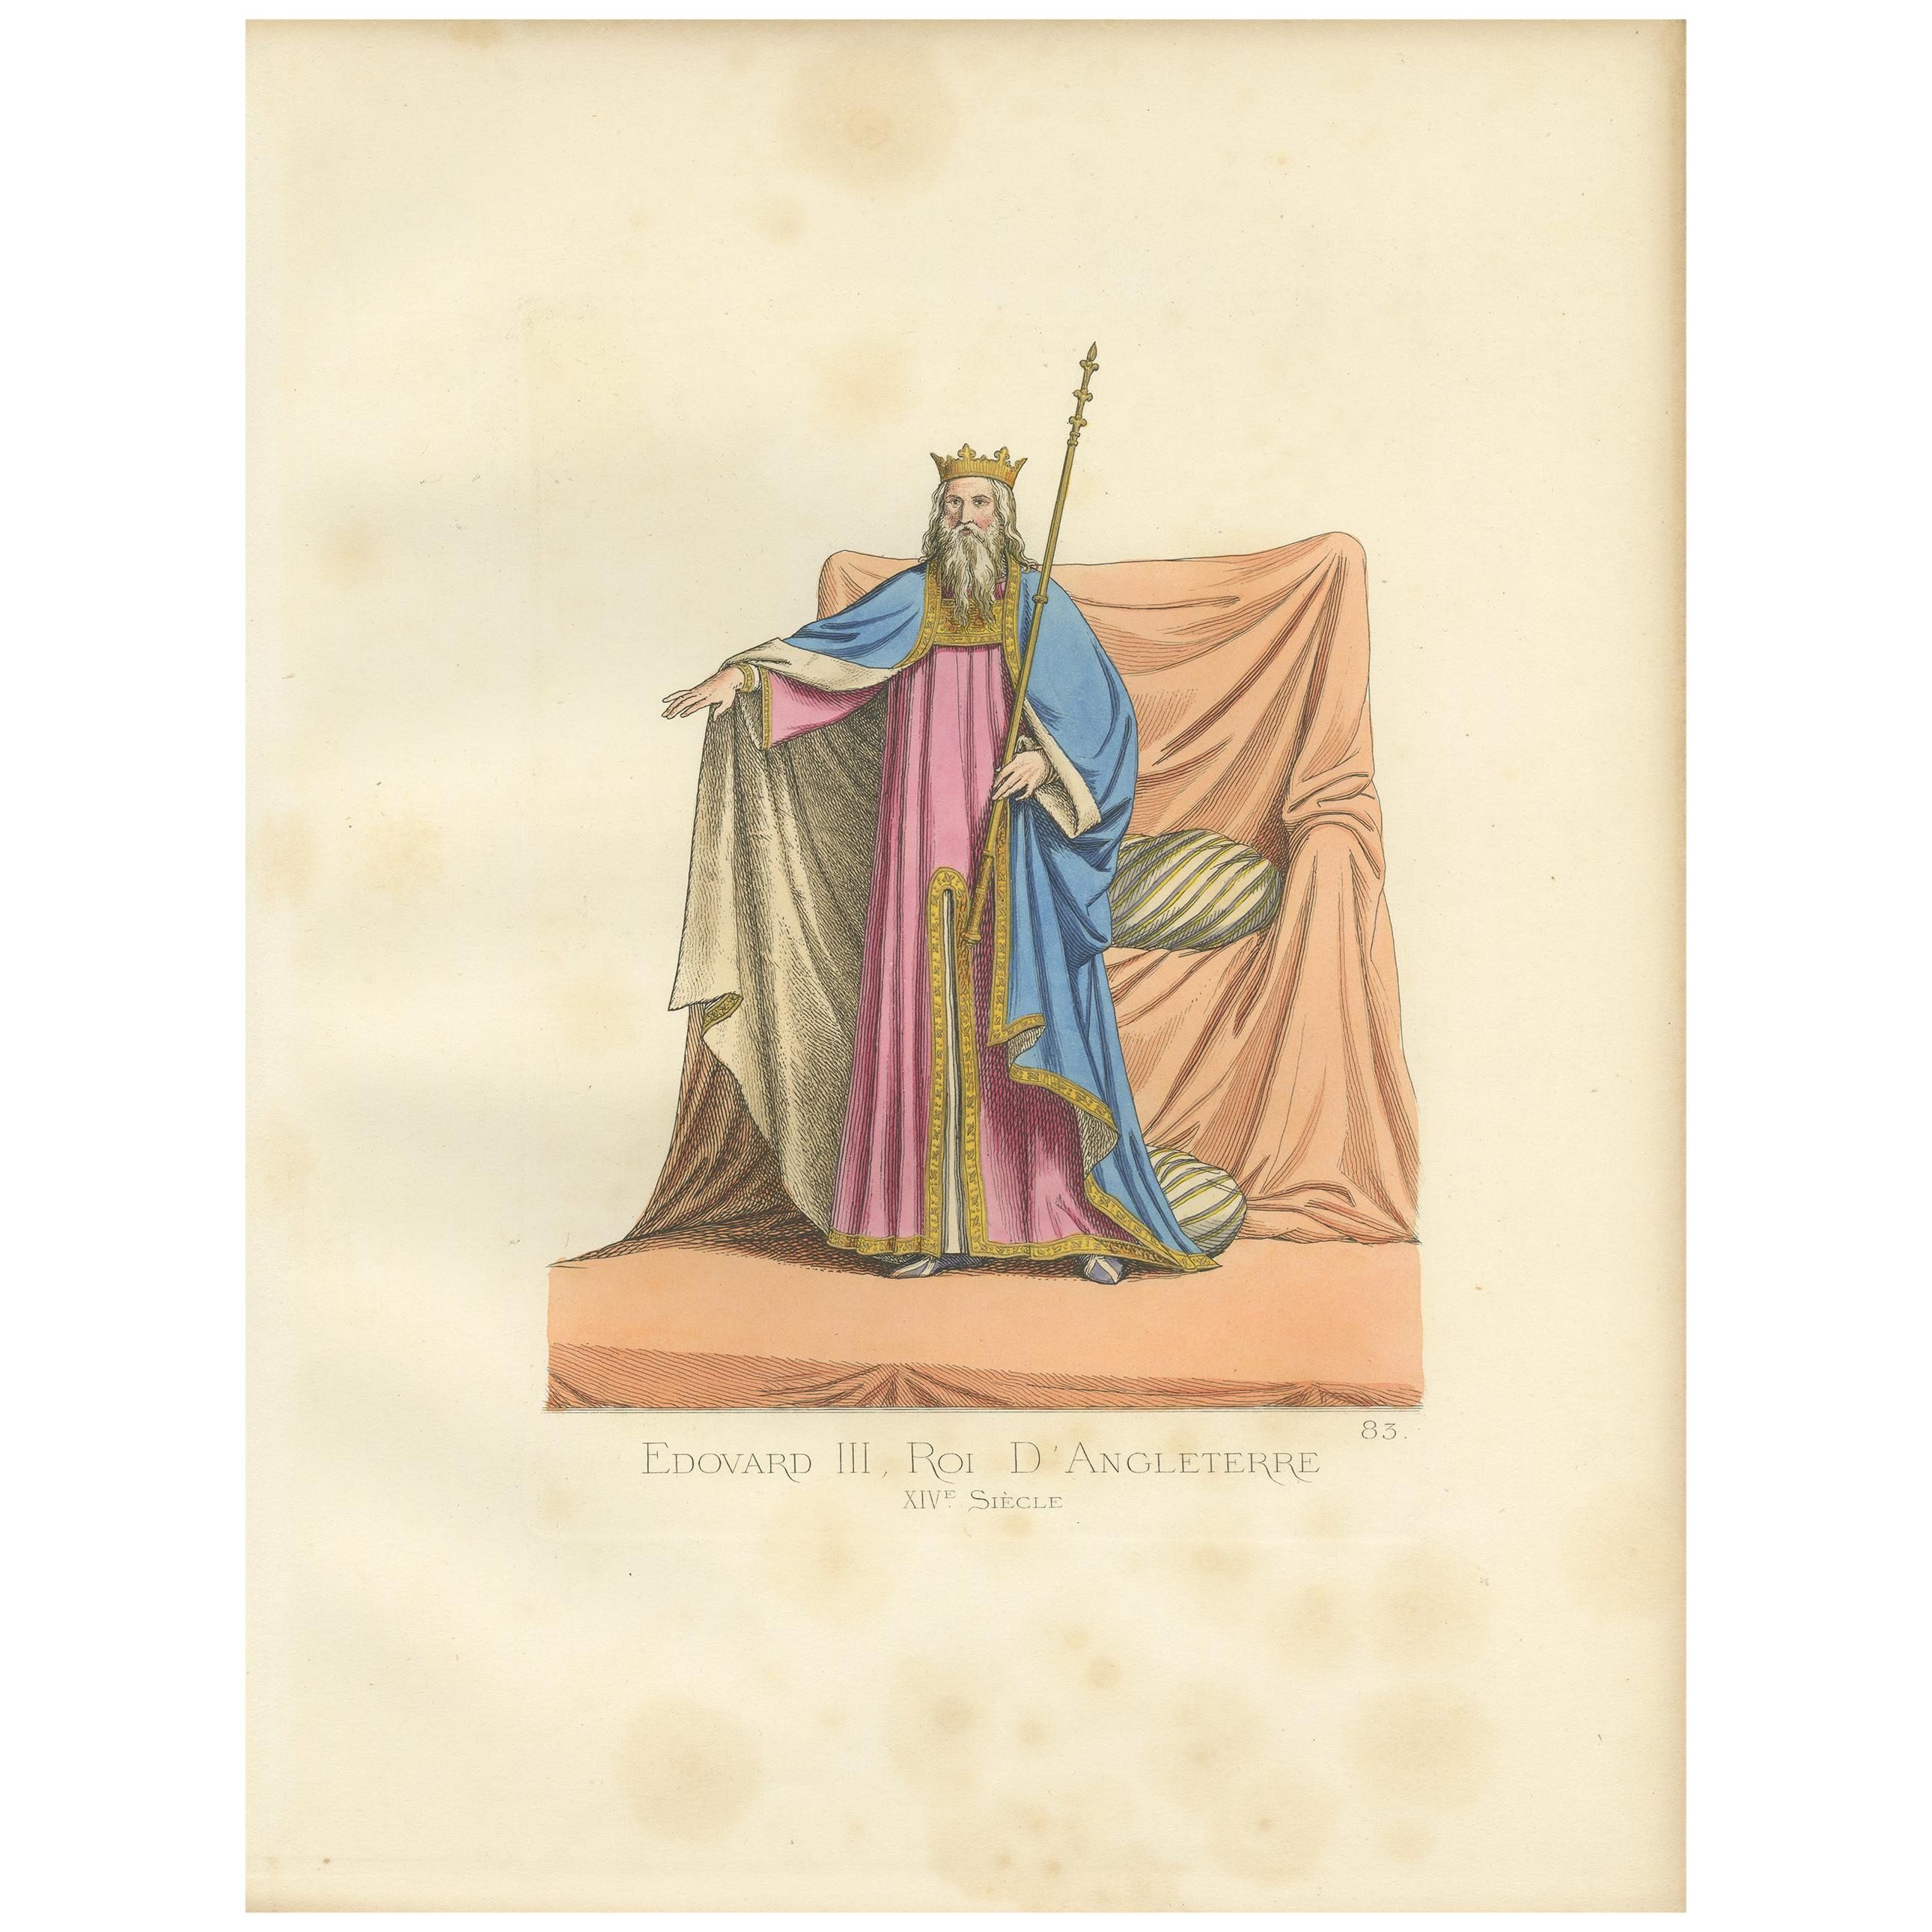 Antique Print of Edward III, King of England, by Bonnard, 1860